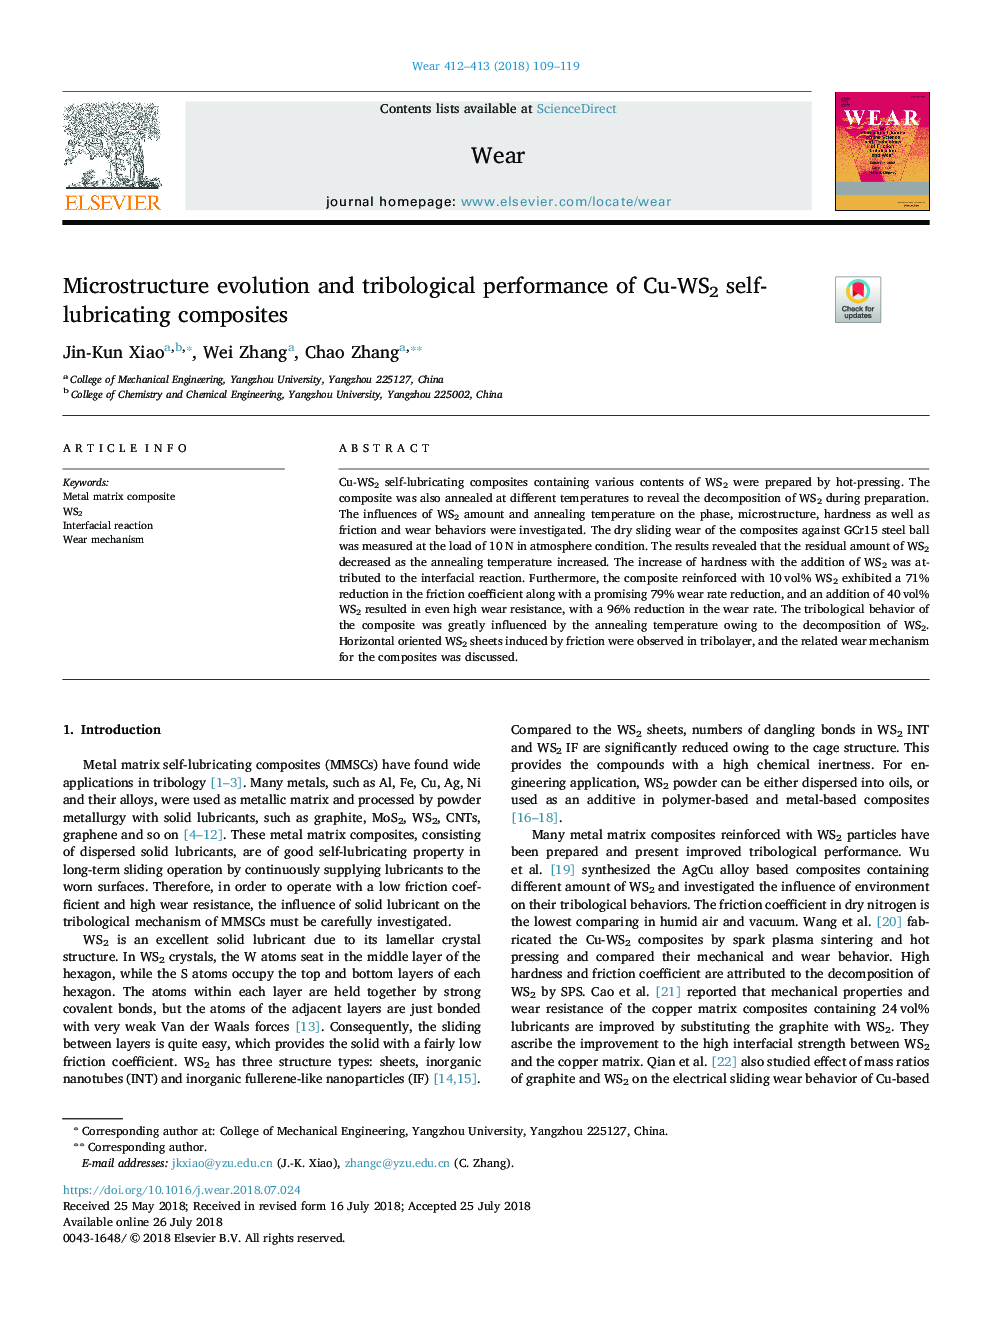 Microstructure evolution and tribological performance of Cu-WS2 self-lubricating composites